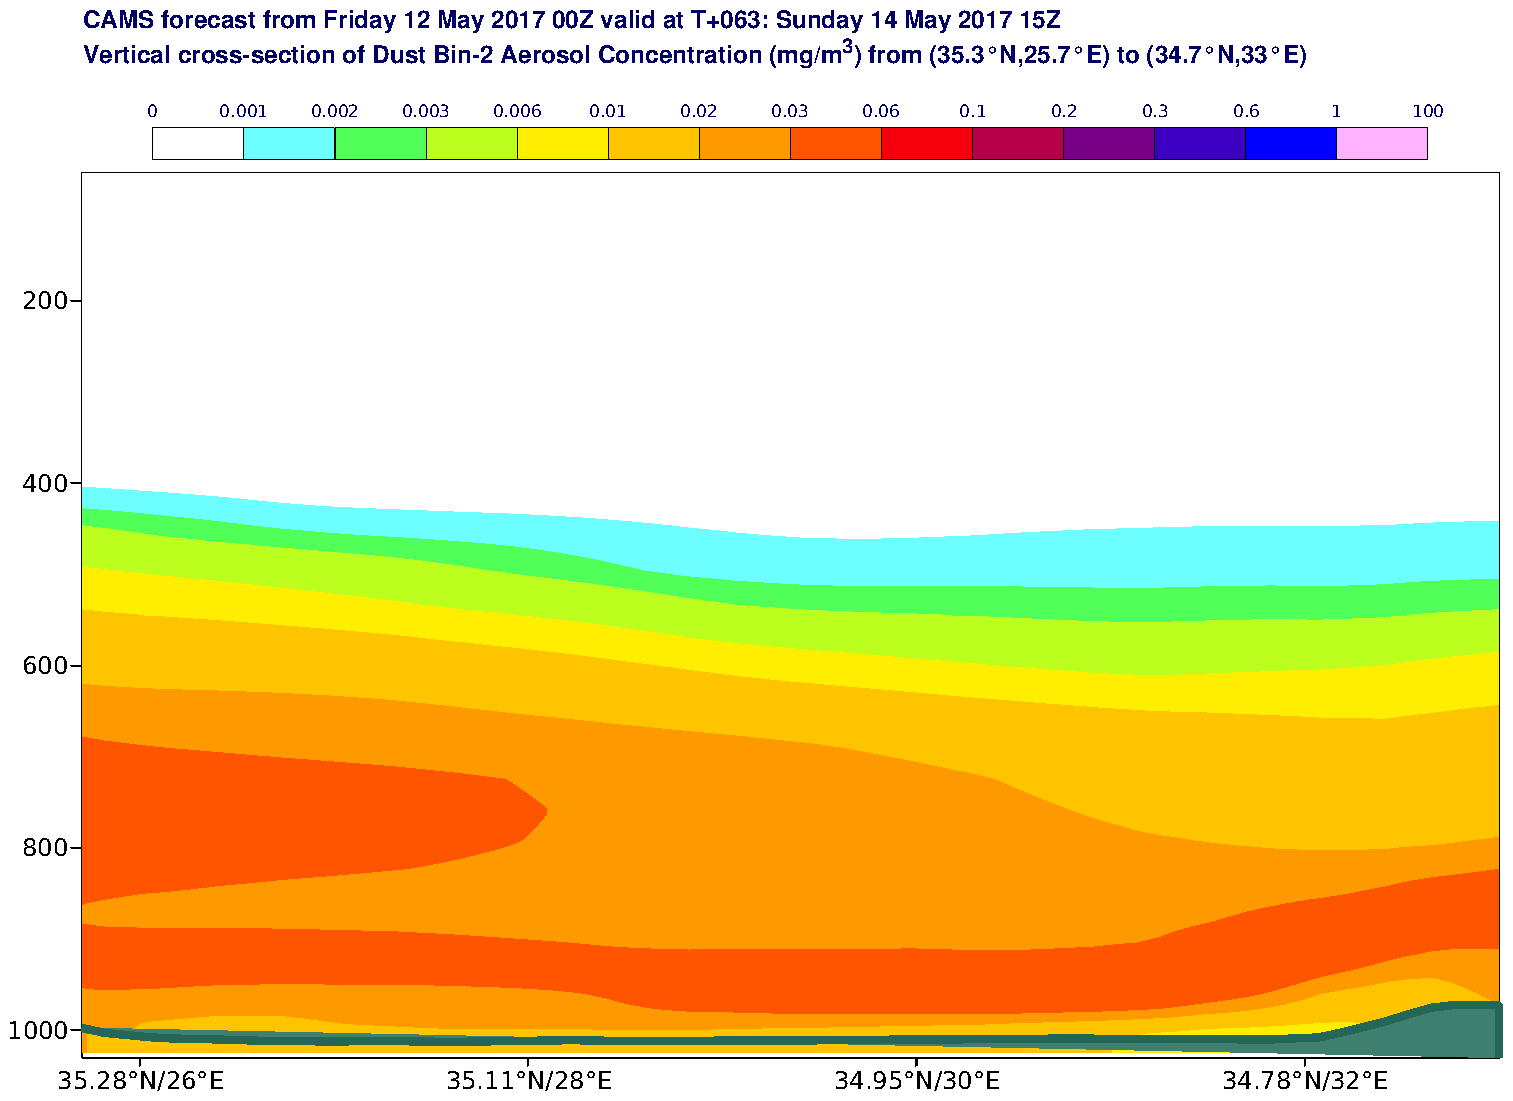 Vertical cross-section of Dust Bin-2 Aerosol Concentration (mg/m3) valid at T63 - 2017-05-14 15:00